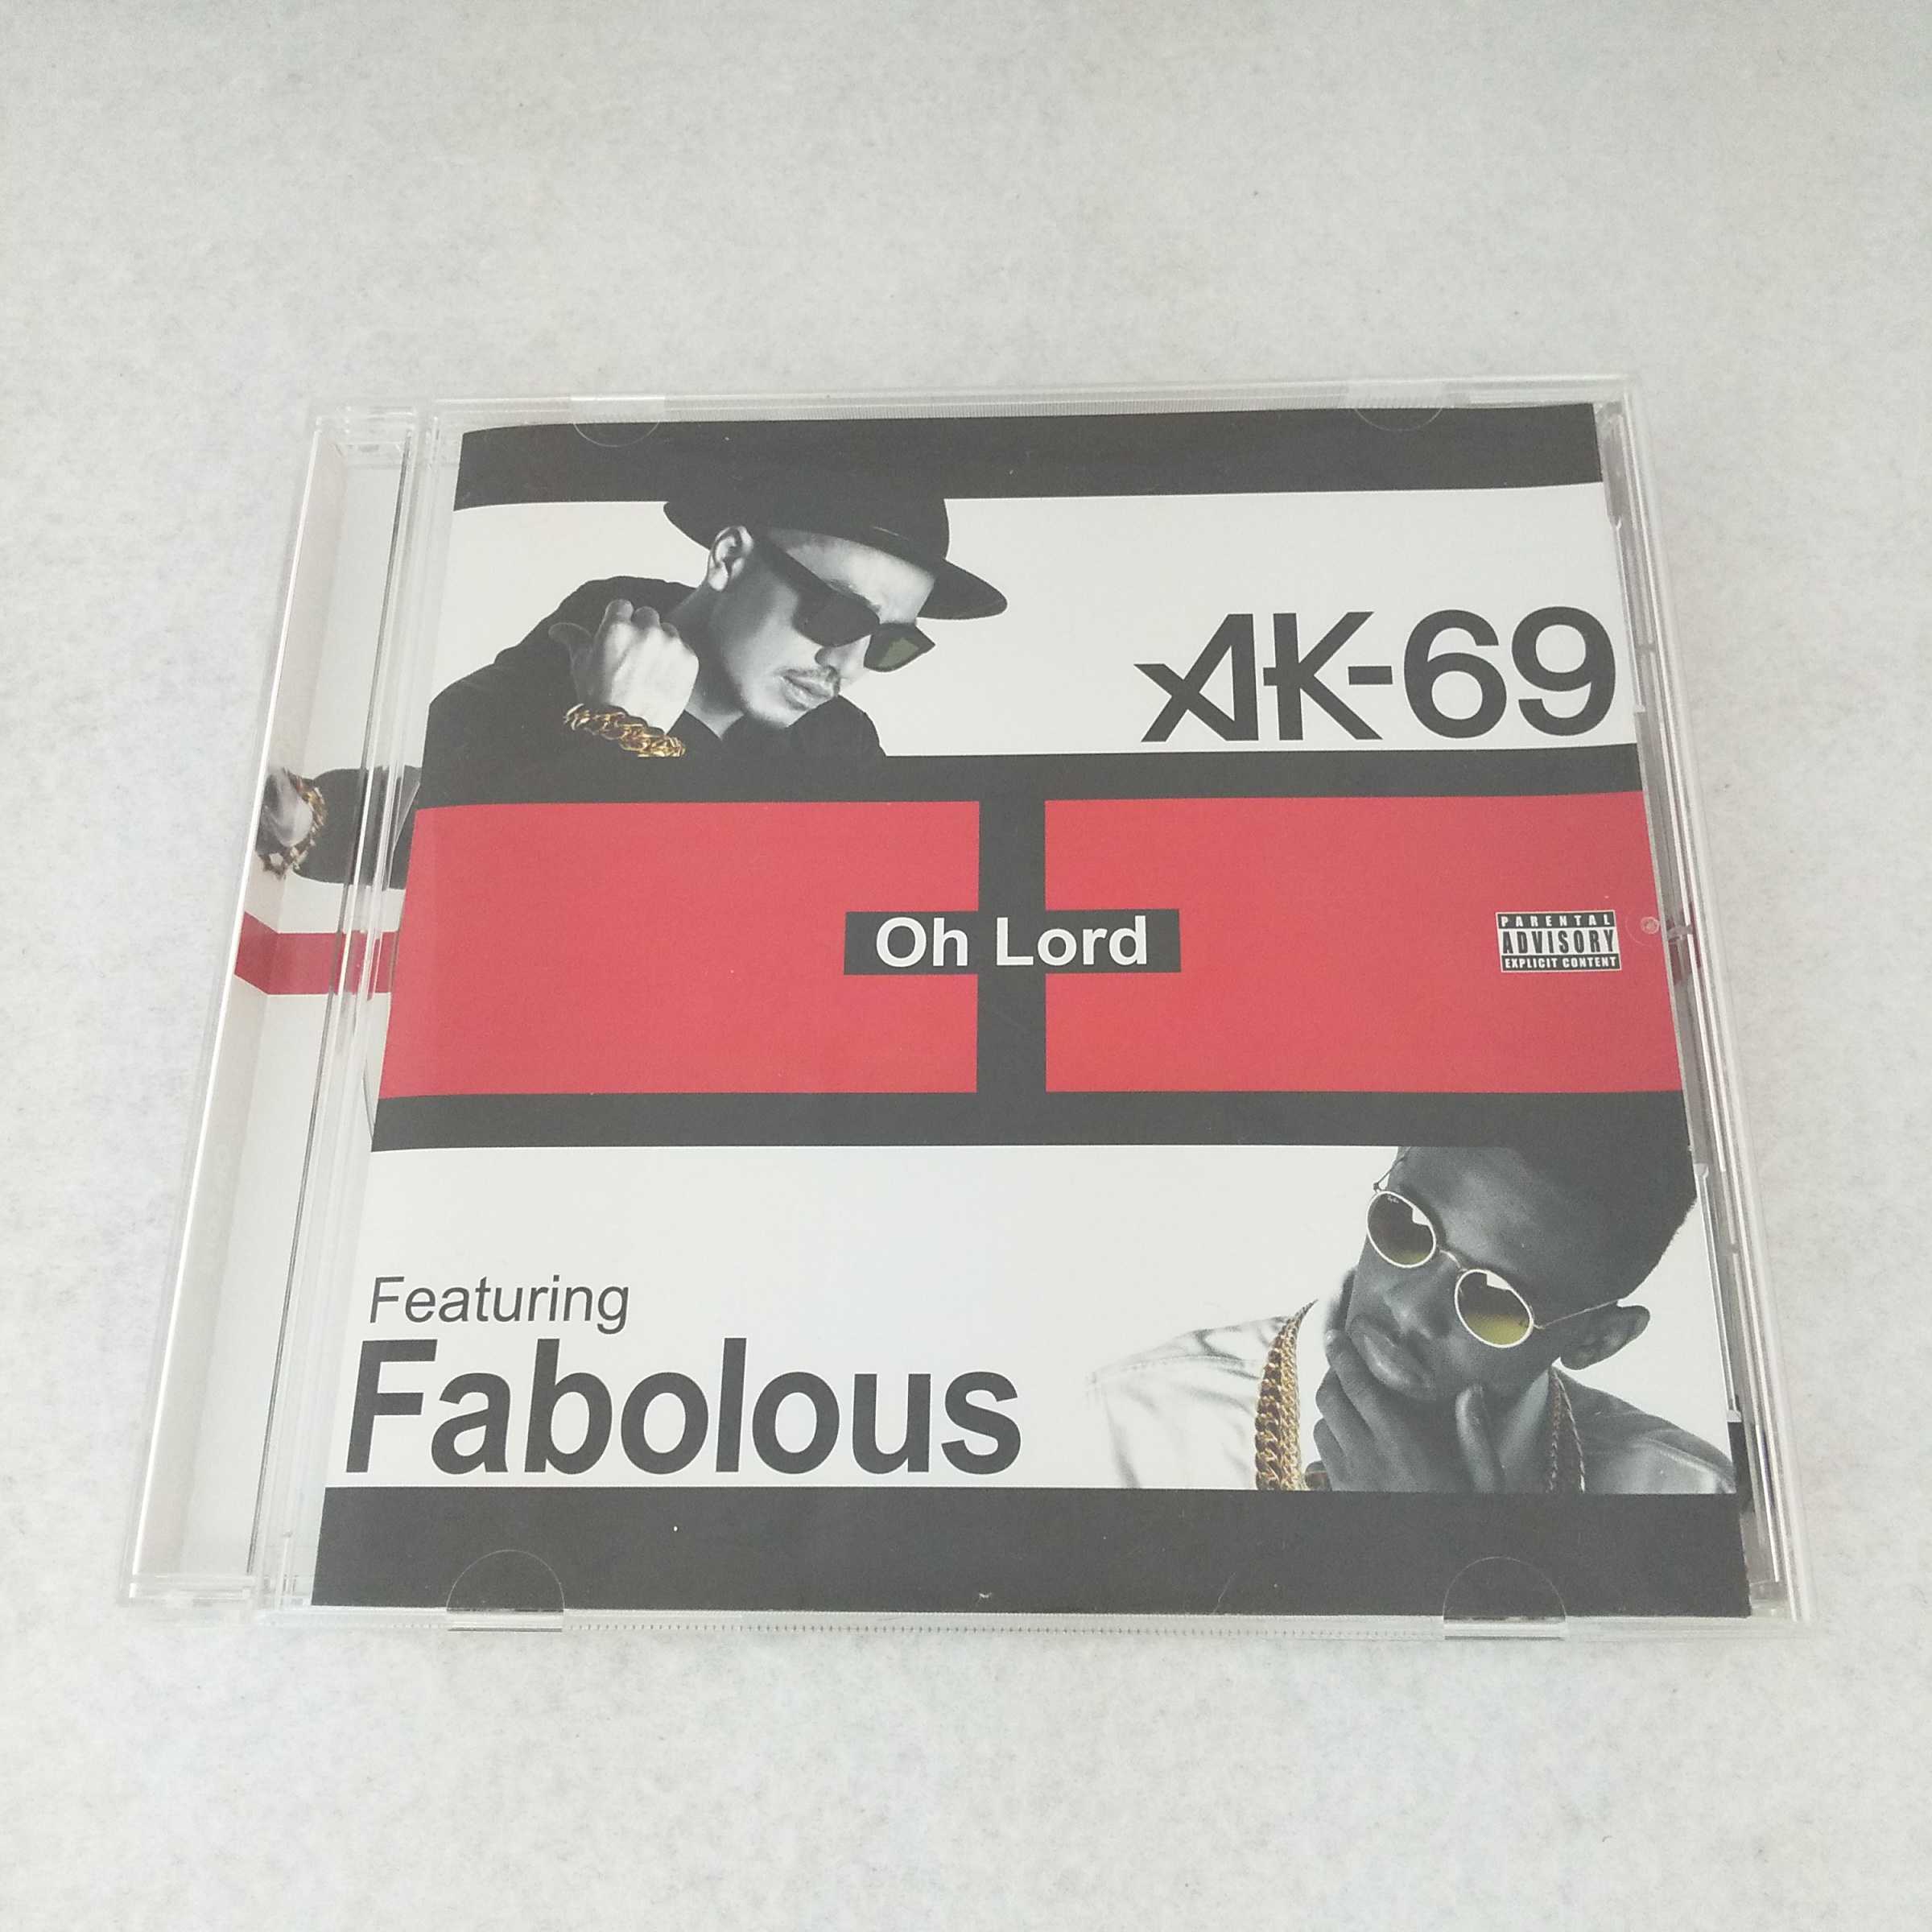 AC09358 【中古】 【CD】 Oh Lord/AK-69 Featuring Fabolous